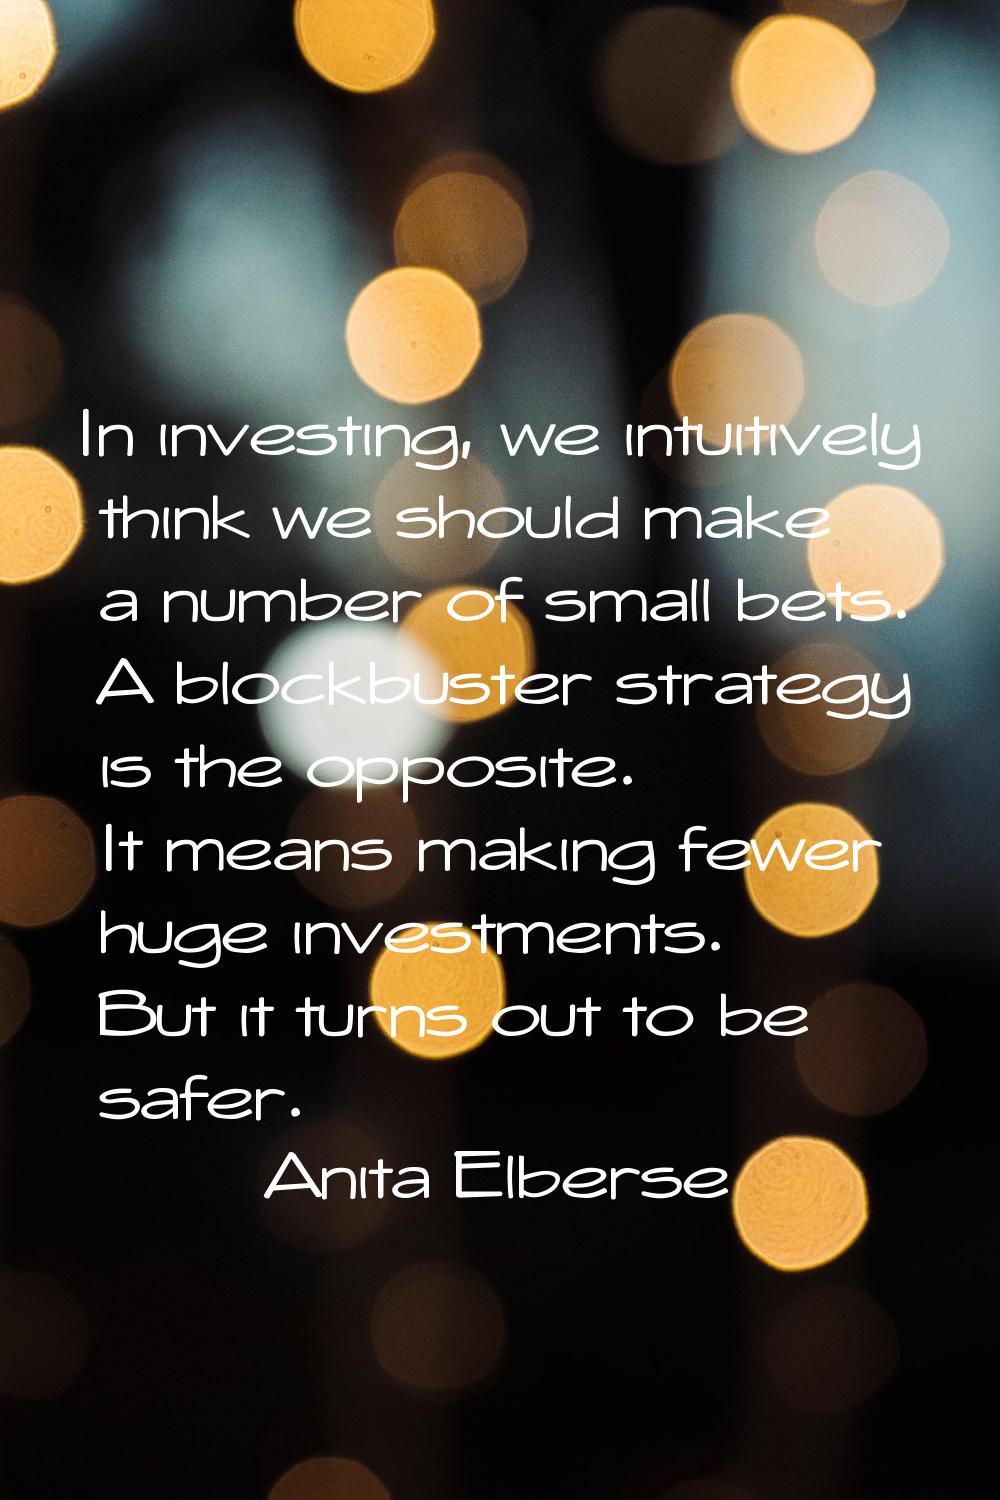 In investing, we intuitively think we should make a number of small bets. A blockbuster strategy is